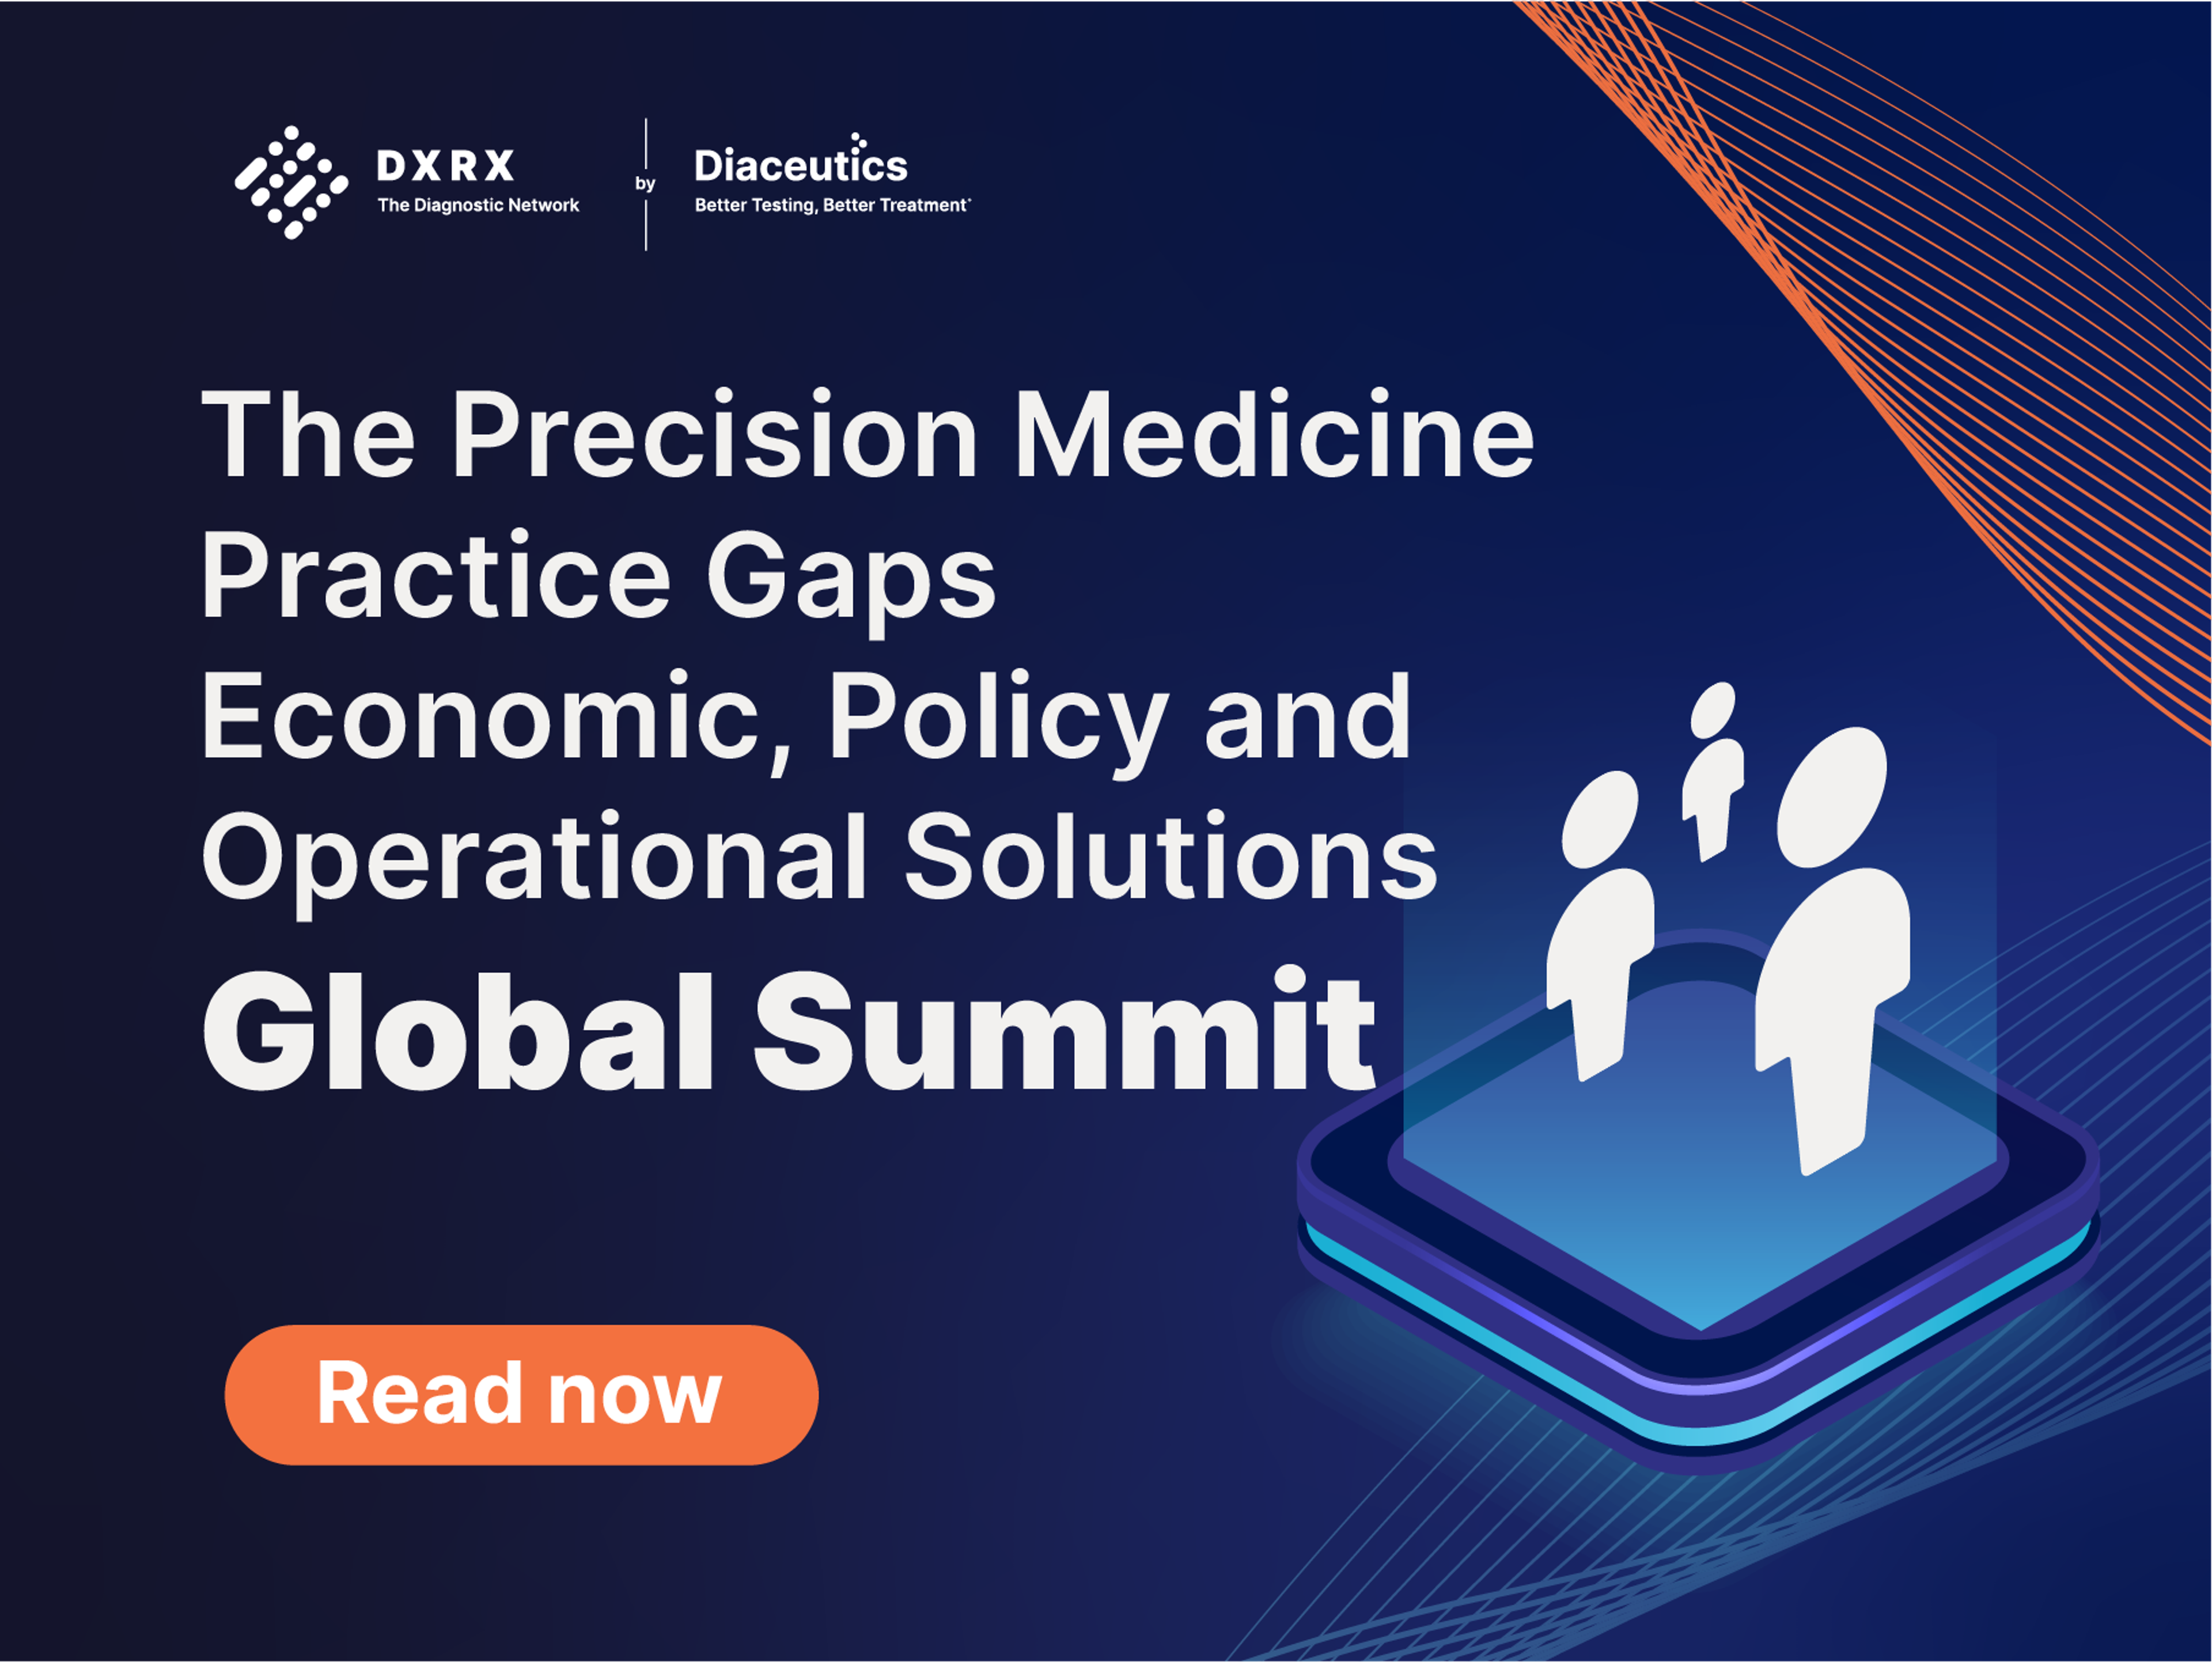 Multi-Stakeholder Group Bring a unique economic solution to the Clinical Practice Gaps holding back Precision Medicine    